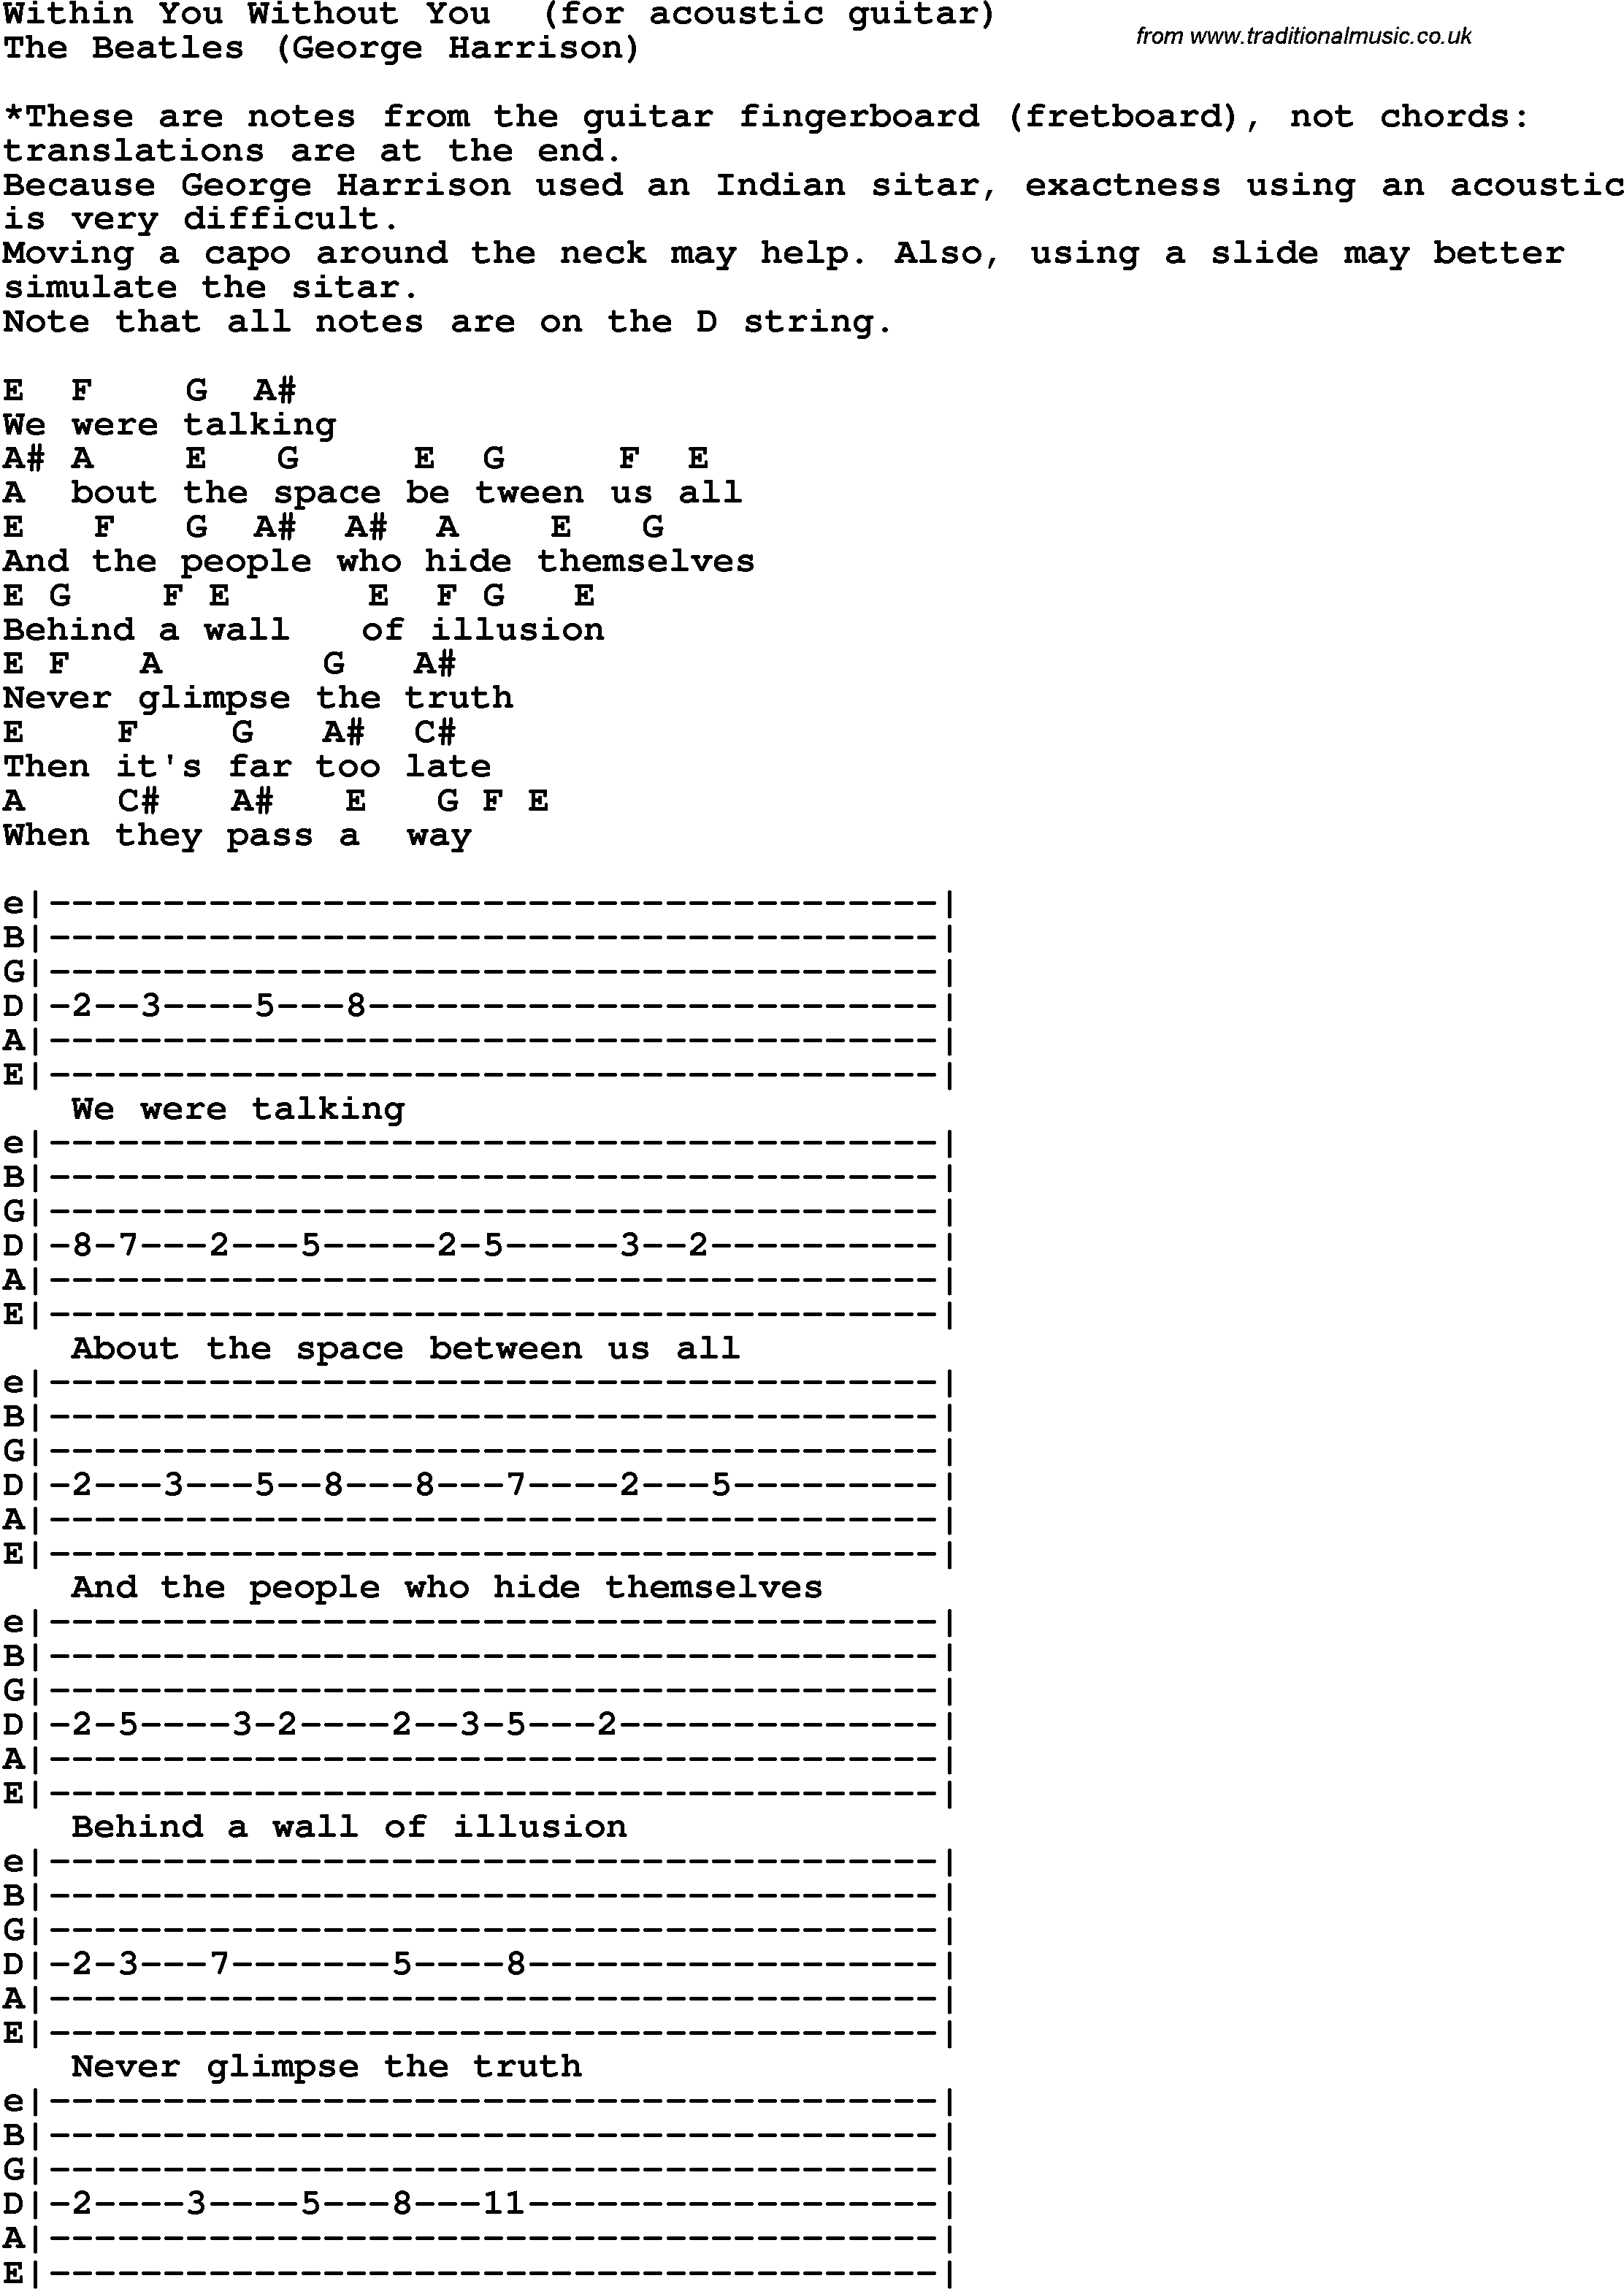 Song Lyrics with guitar chords for Within You Without You